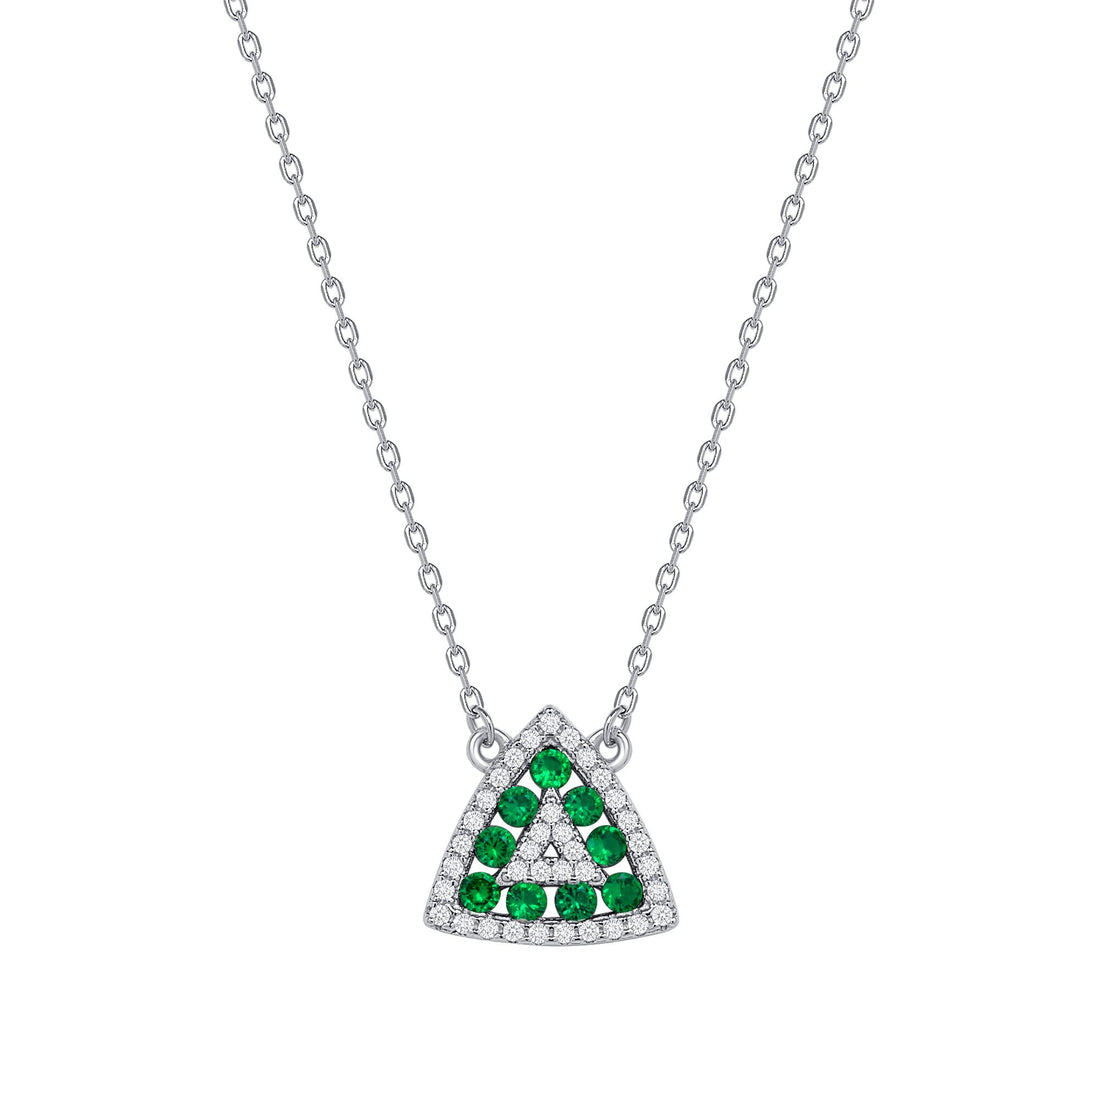 925 Sterling Silver Round Cut Green &amp; White CZ Alternating Rows Triangle Pendant &amp; Stud Earrings Jewelry Set